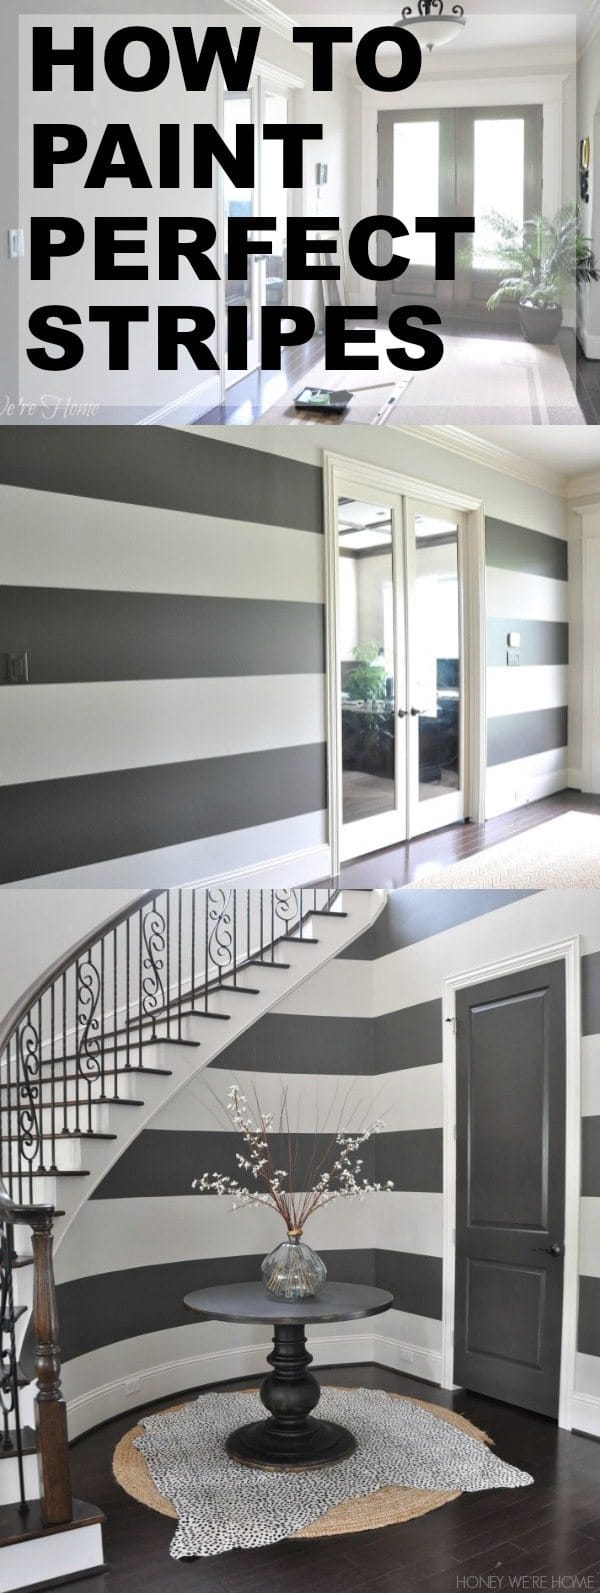 How to paint perfect stripes 